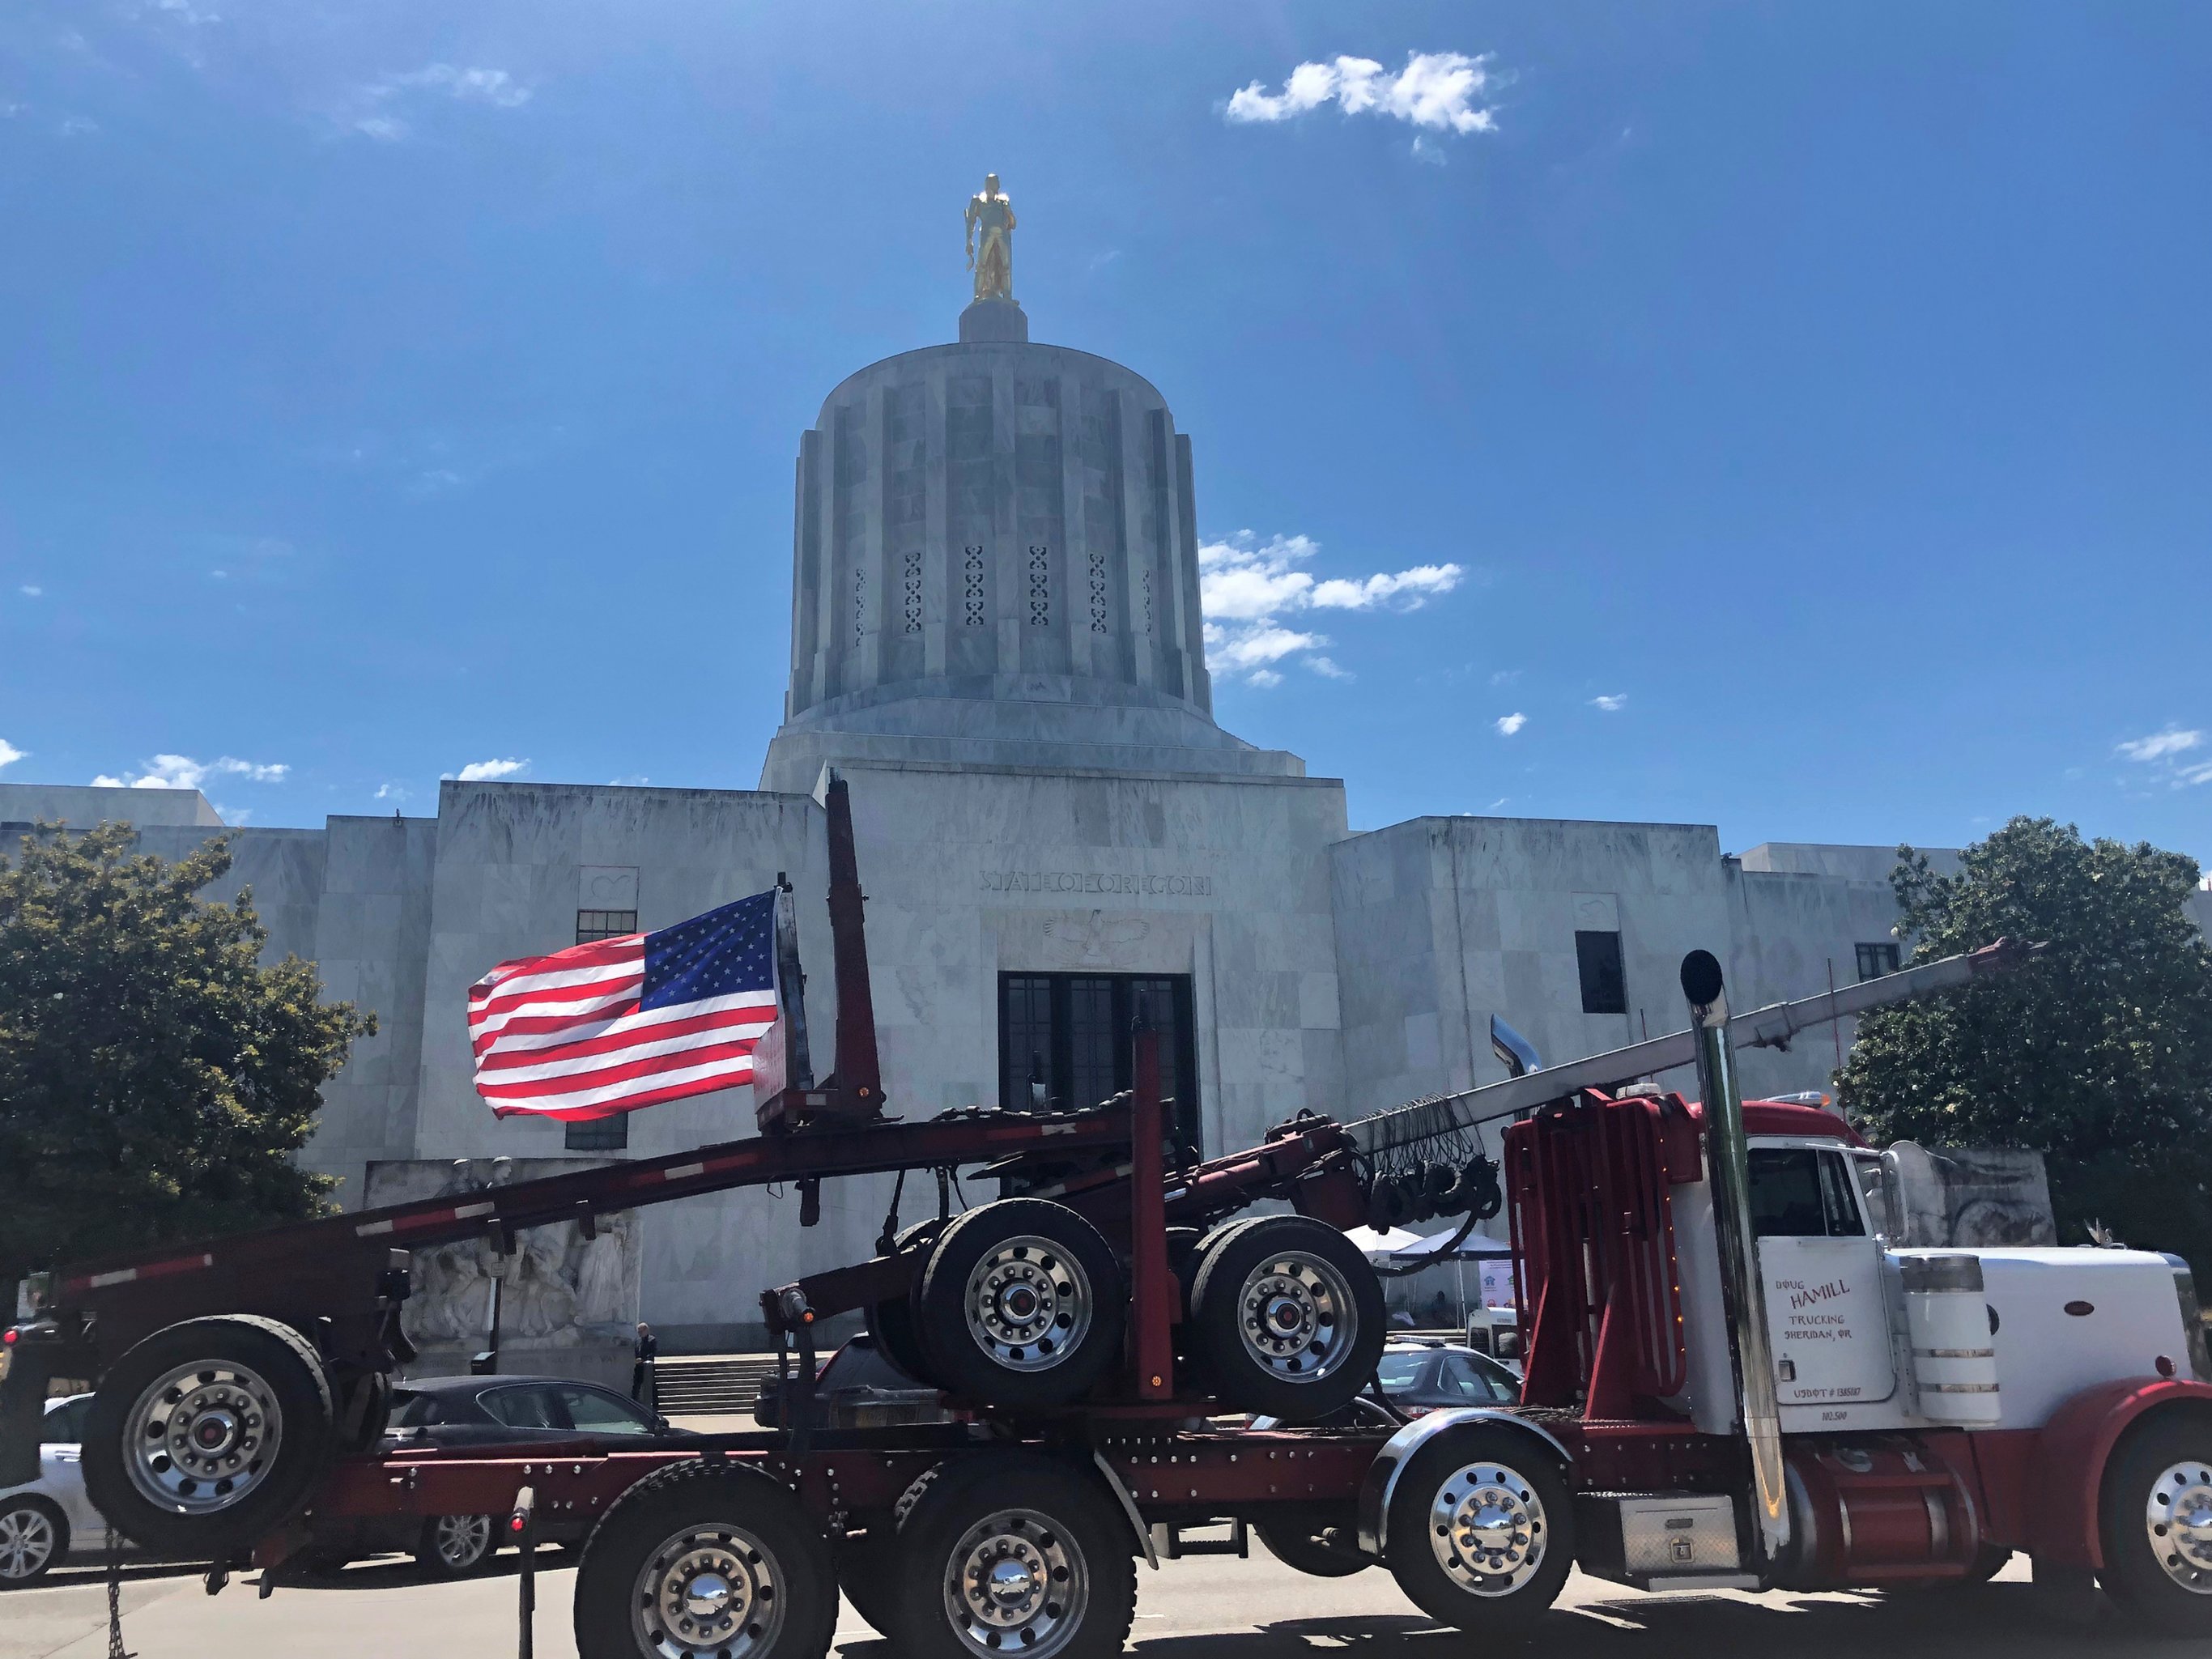 A truck moves around the Oregon state Capitol during a protest against climate bills that truckers say will put them out of business, in Salem, Oregon on 12 June 2019. Photo: Sarah Zimmerman / AP Photo